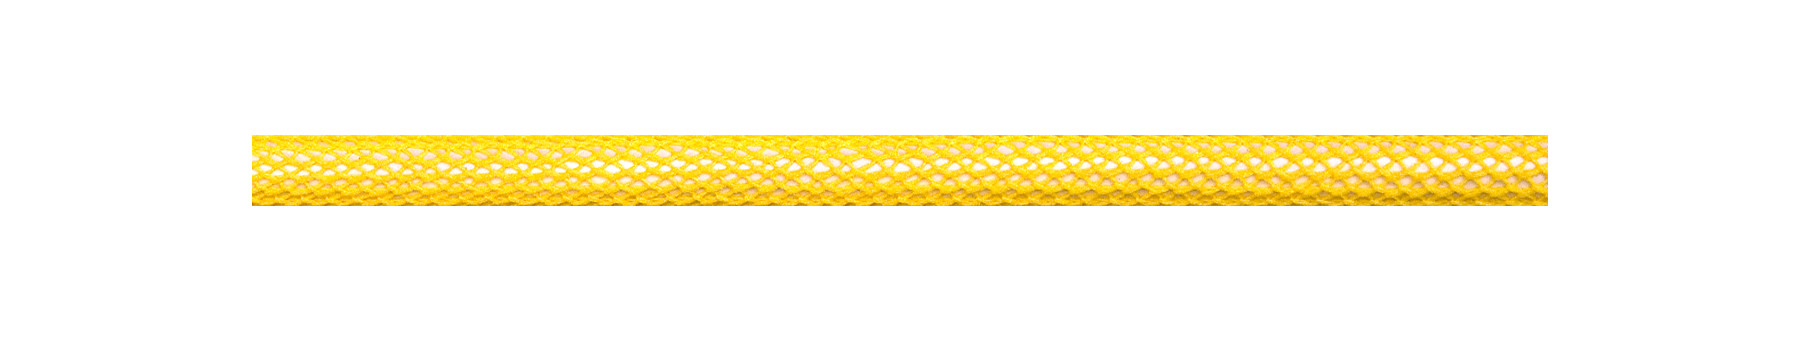 Textile Cable Yellow Netlike Textile Covering